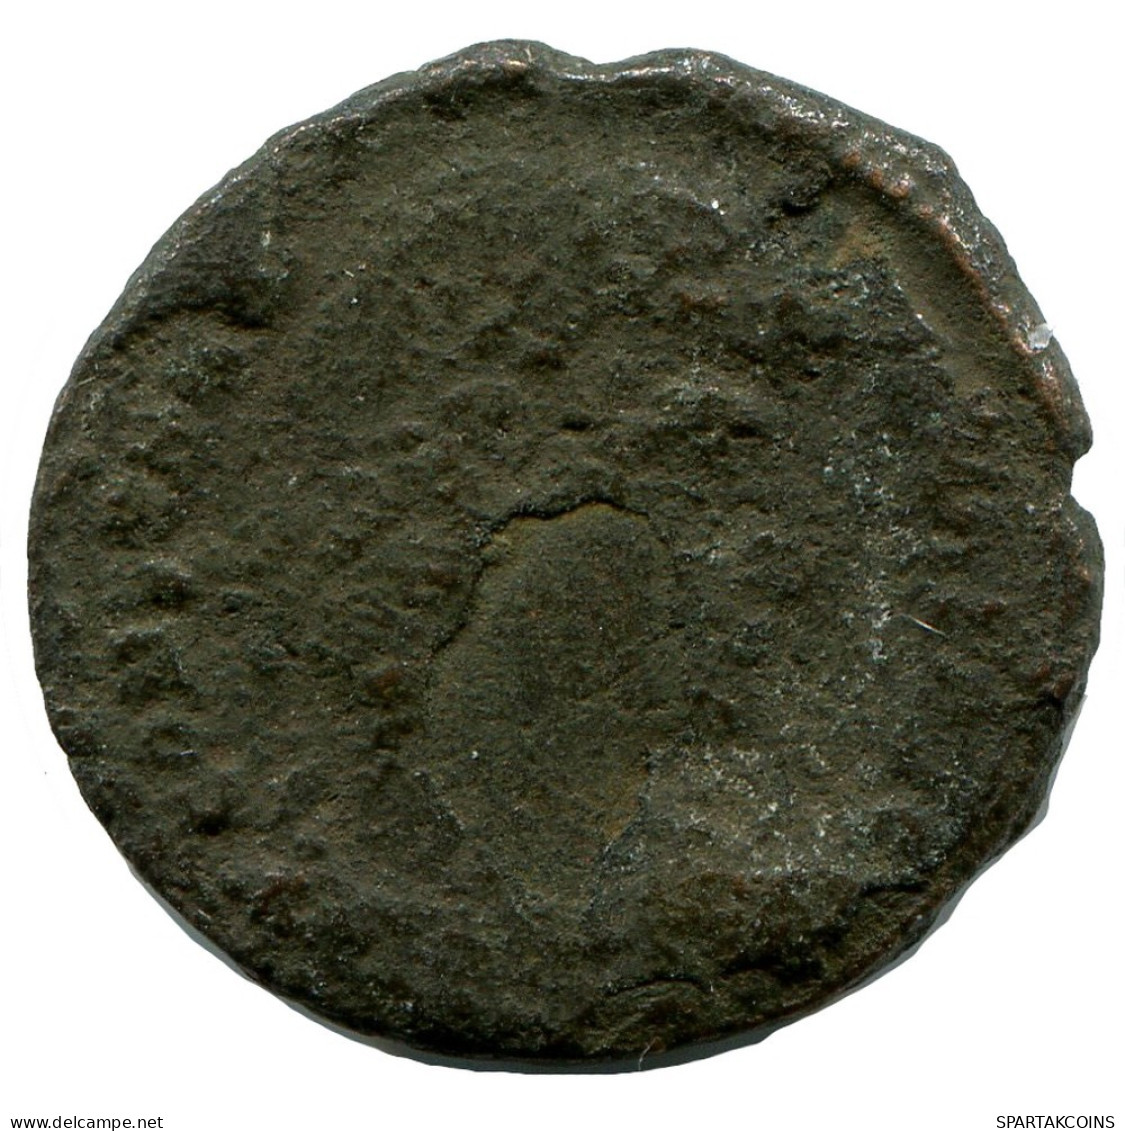 CONSTANTINE I MINTED IN NICOMEDIA FOUND IN IHNASYAH HOARD EGYPT #ANC10846.14.F.A - El Imperio Christiano (307 / 363)